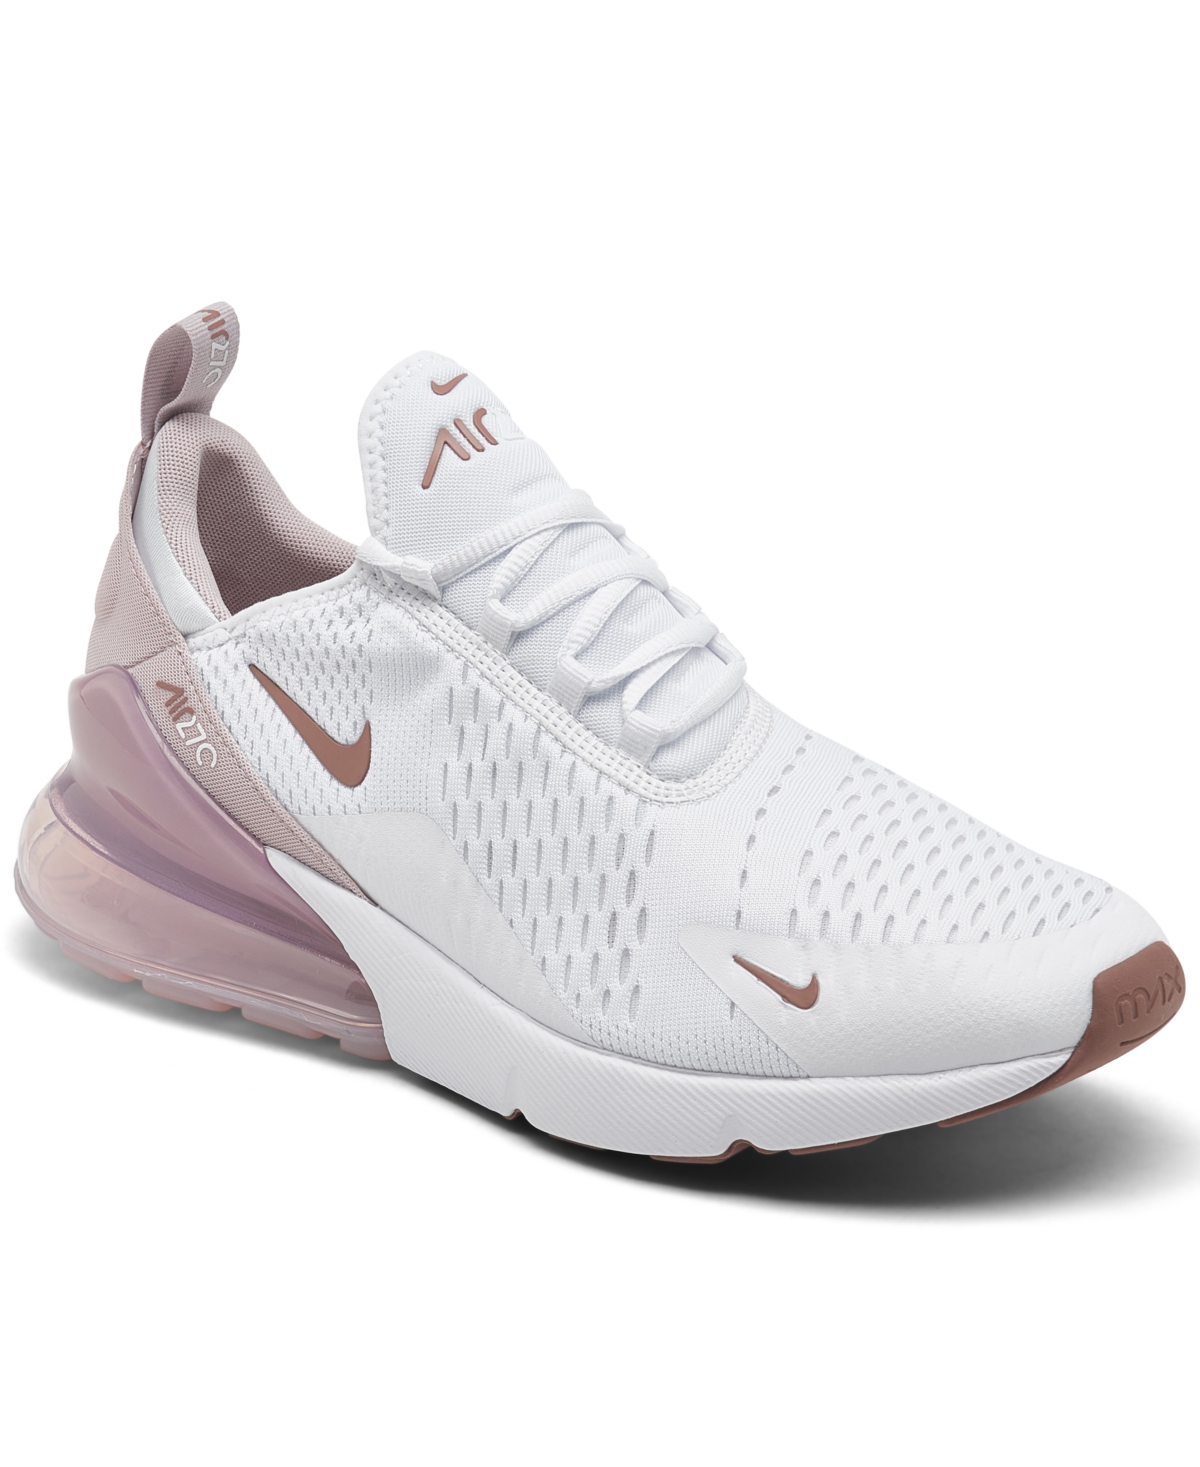 Women's Air Max 270 Casual Sneakers from Finish Line - WHITE/PLAT VIOLET/SMOKEY